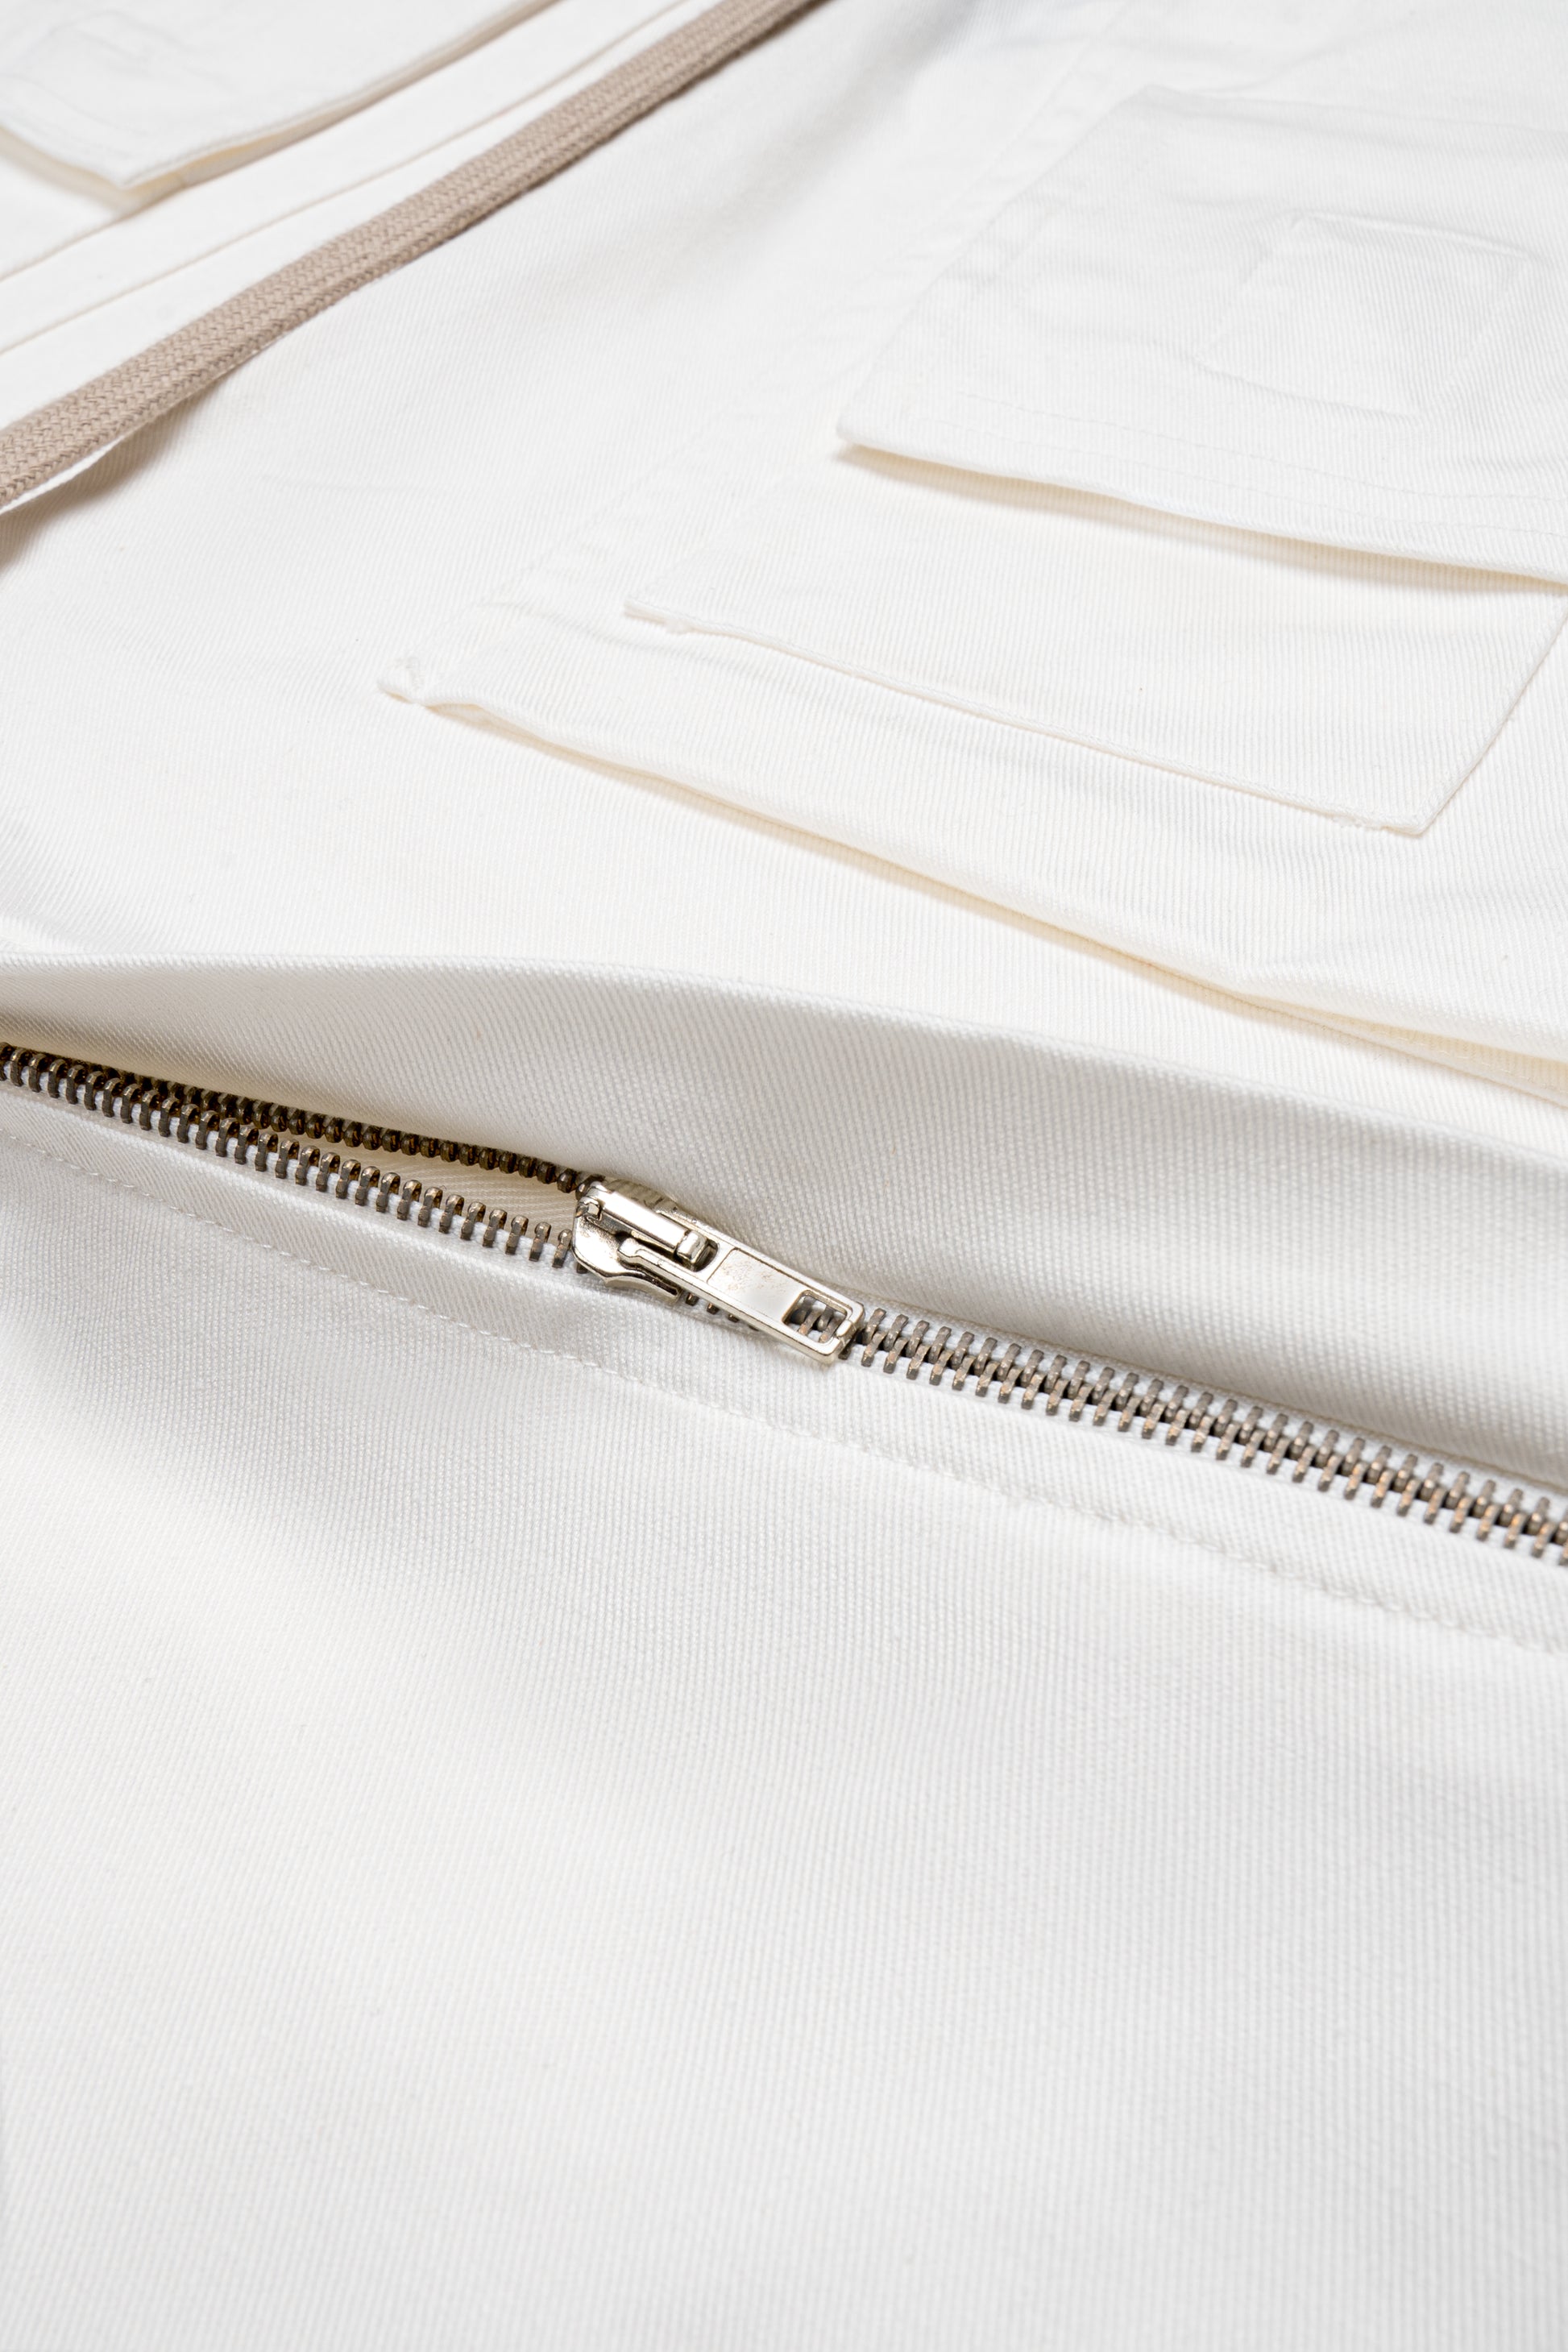 Zipper detailing close up from white convertible pants